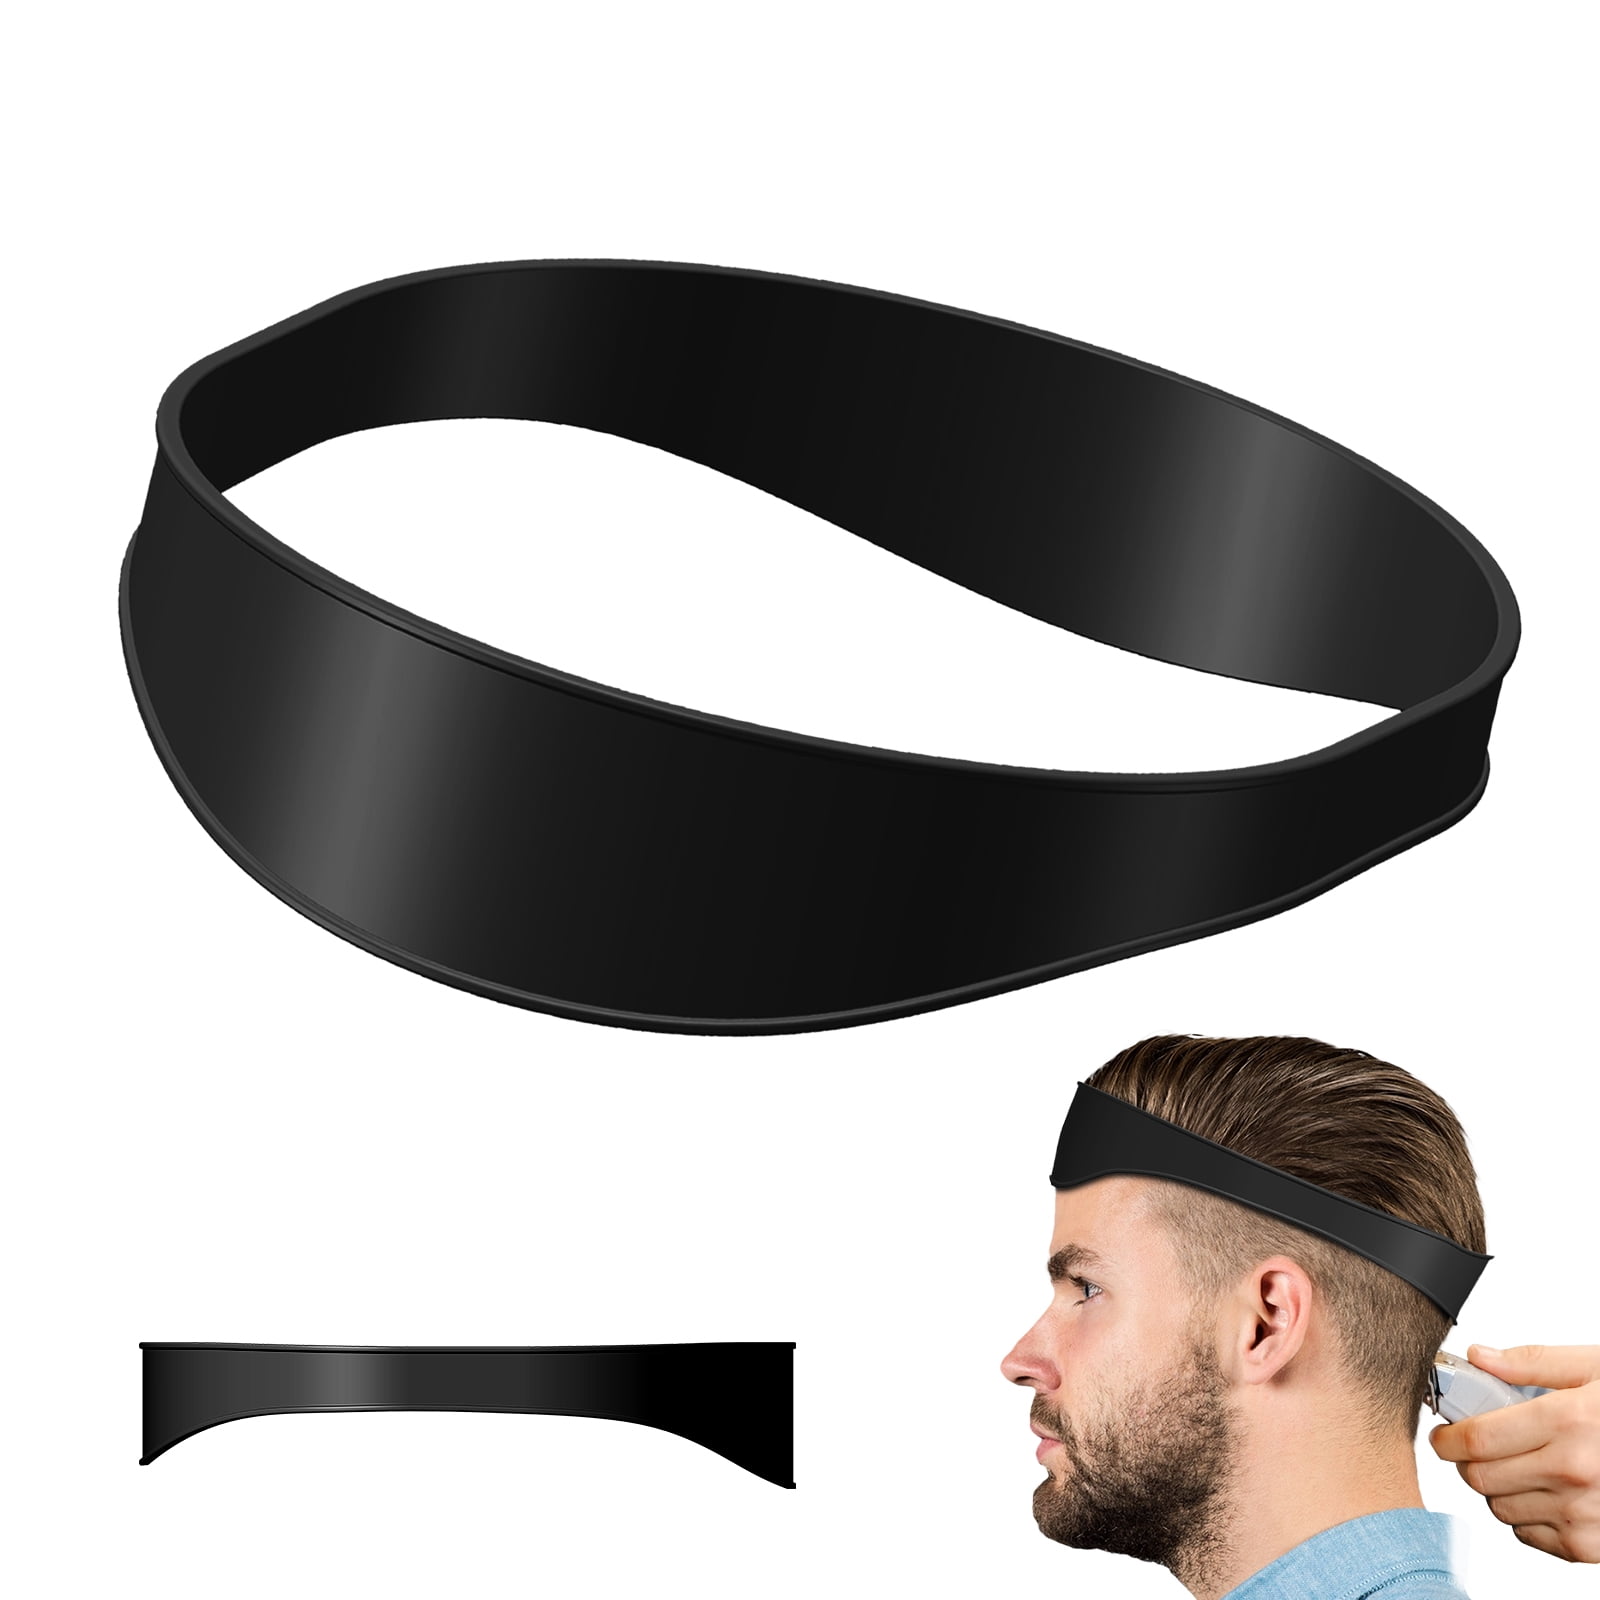 Neckline Shaving Template and Hair Trimming Guide, Curved Silicone Haircut  Band for DIY Home Haircuts - Buzz, Fade and Taper Guide for Clippers  (Black) 